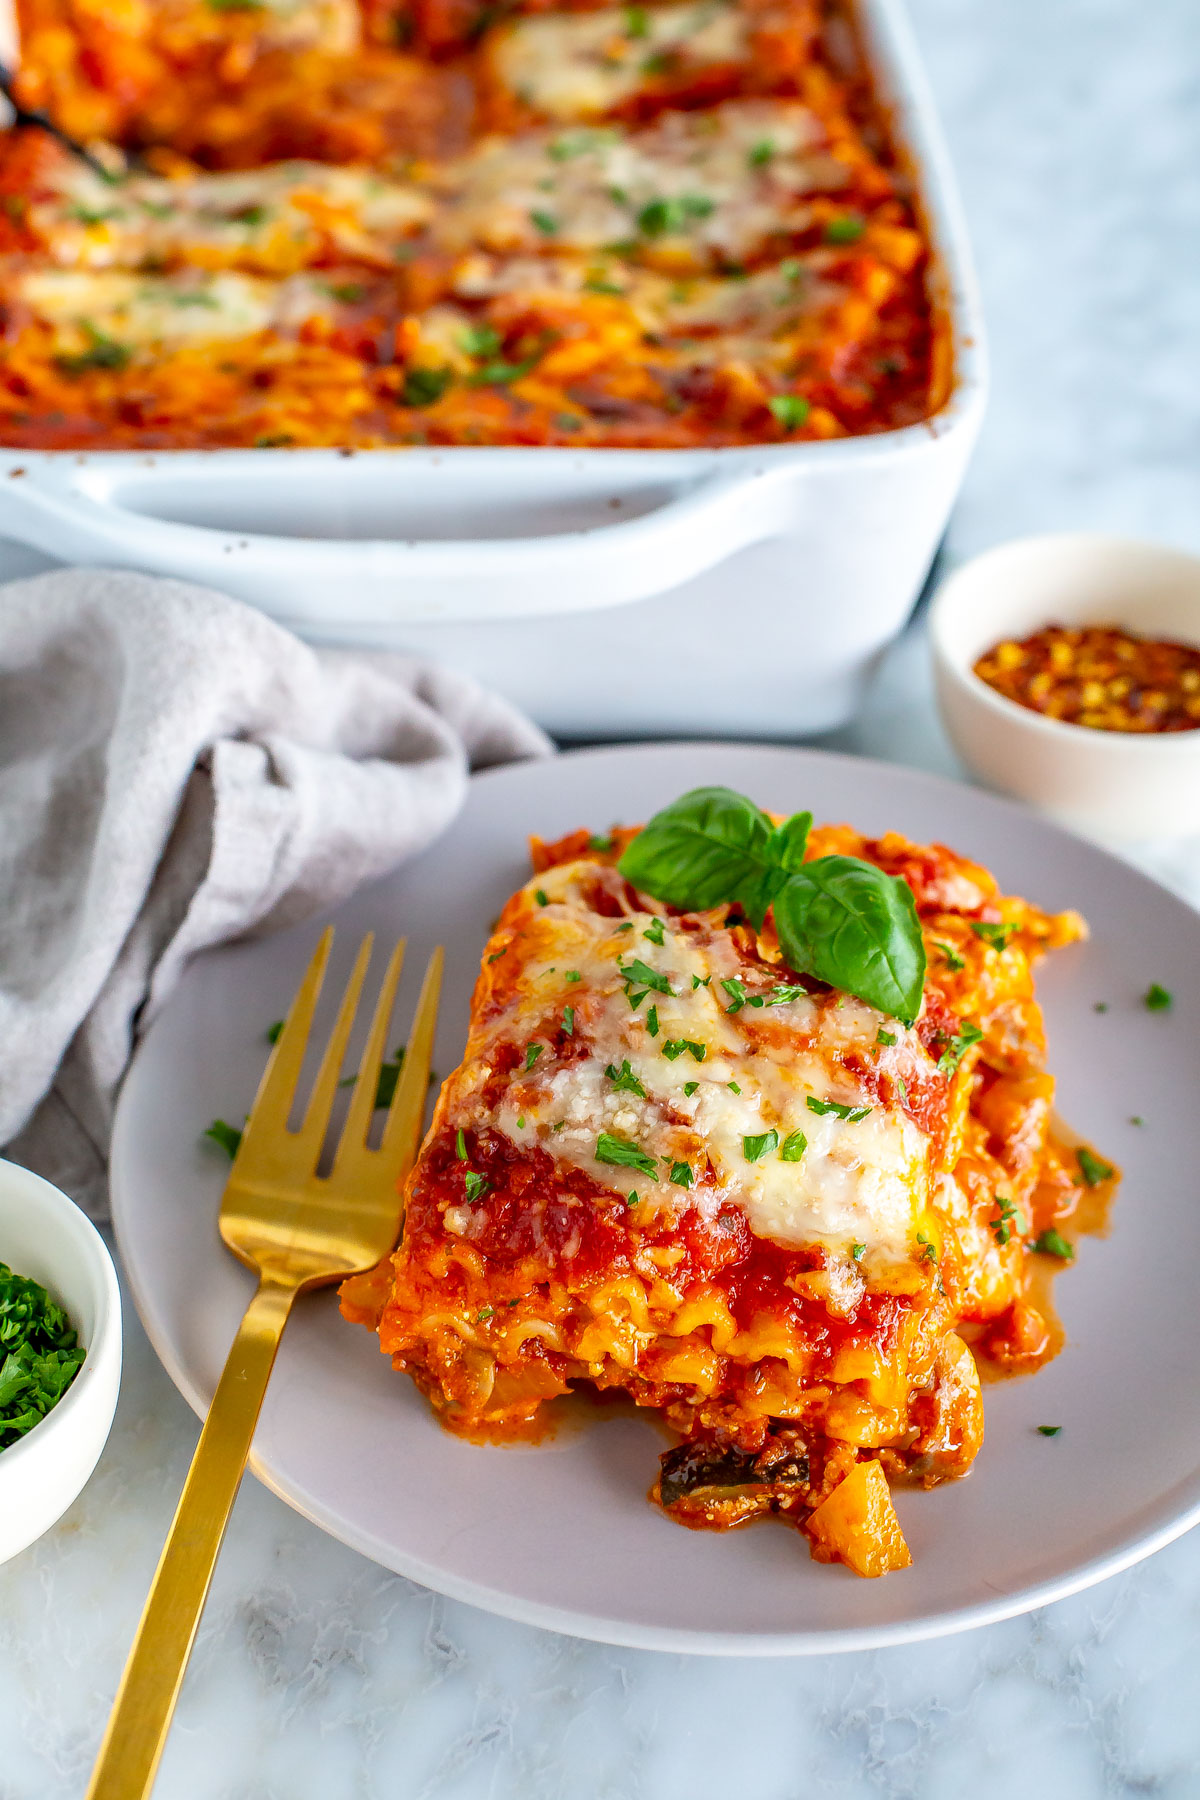 A slice of vegetarian lasagna on a plate.